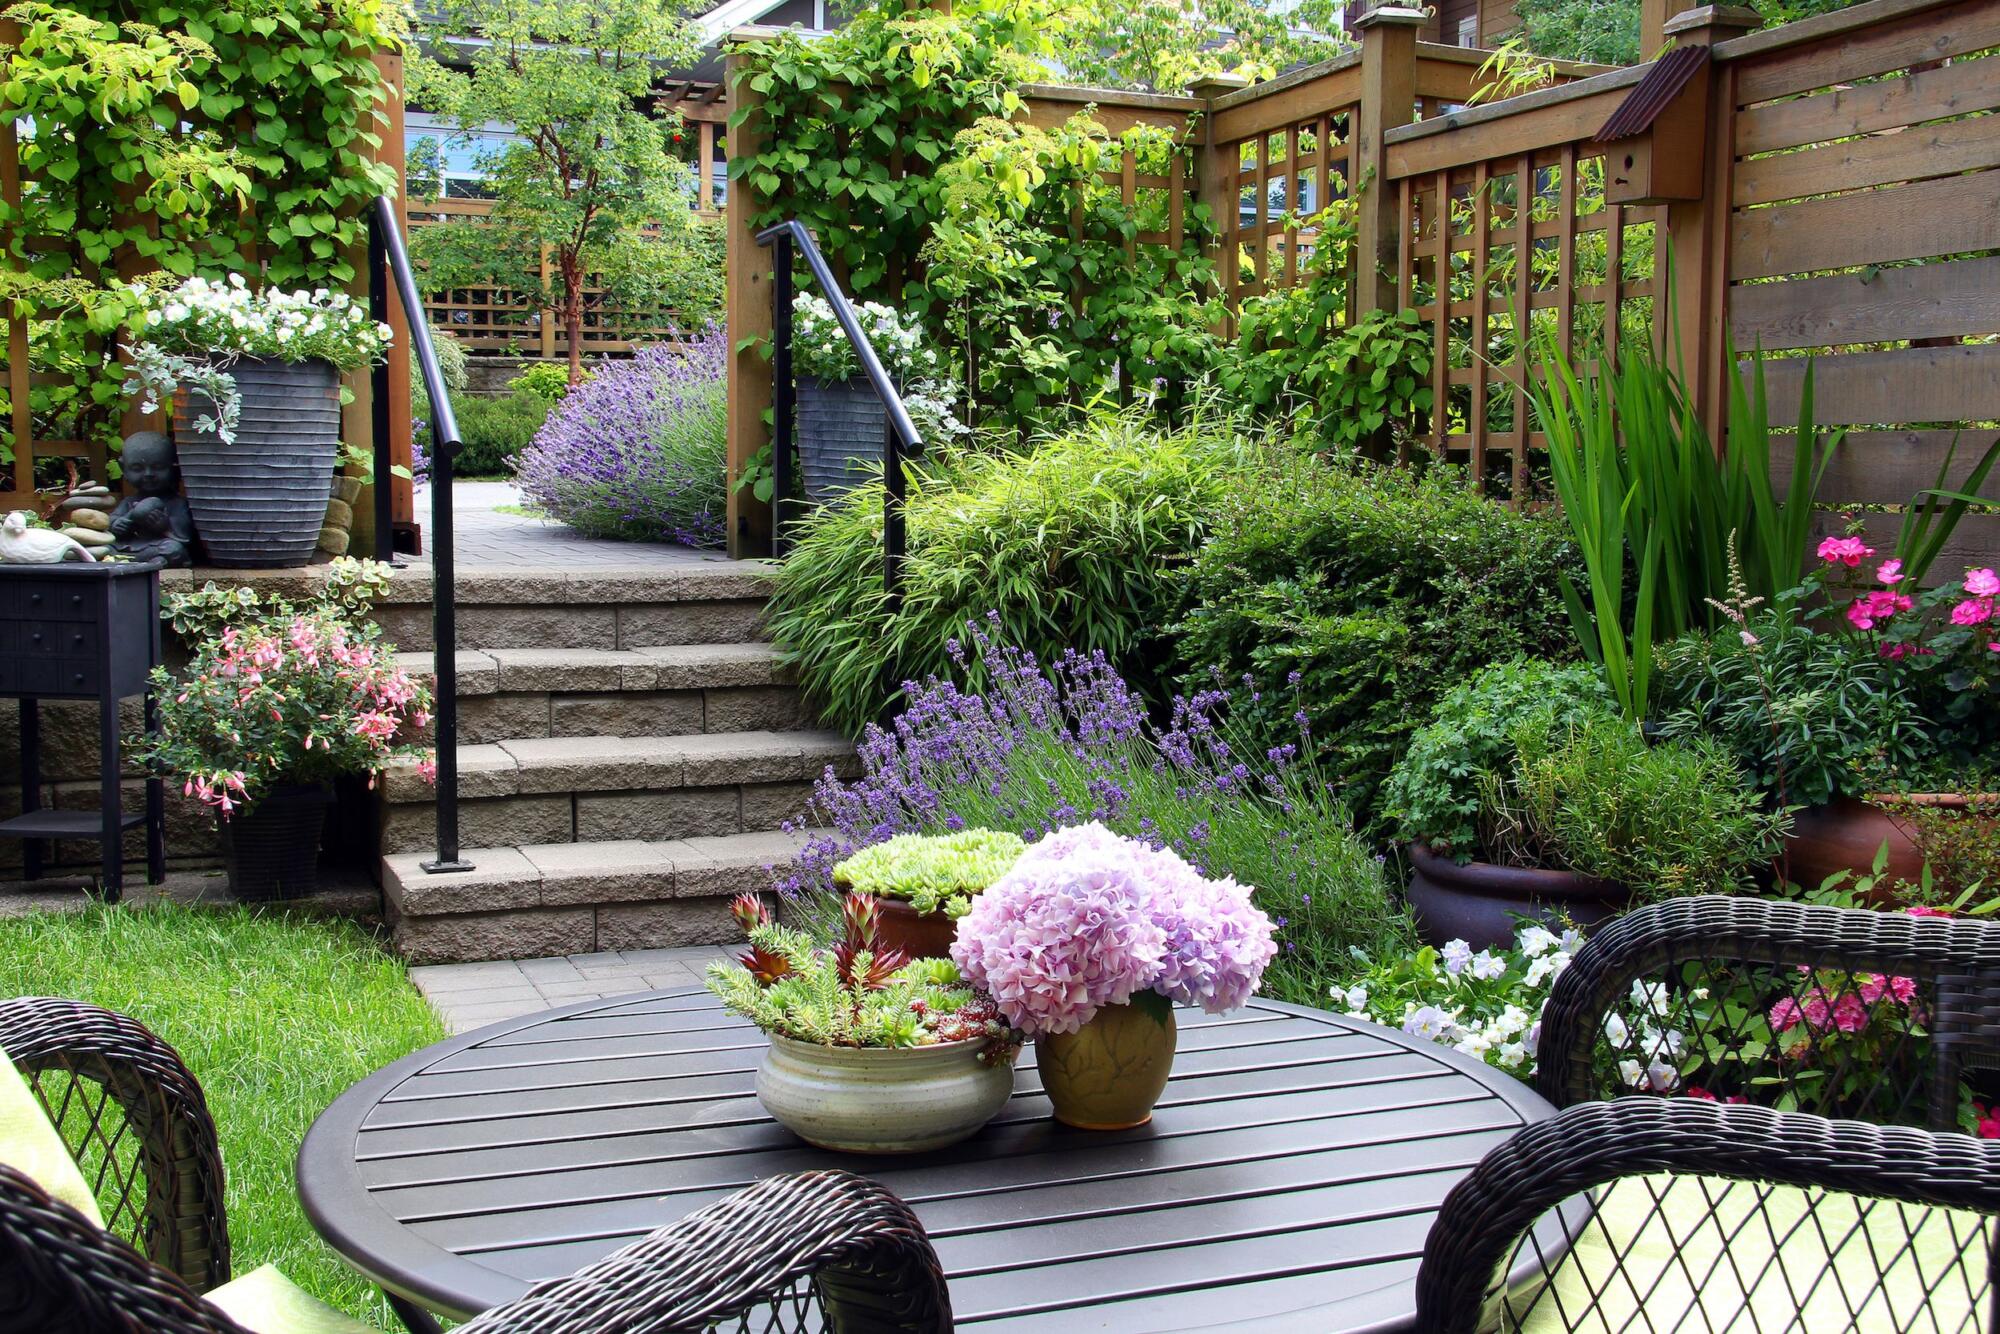 How to decorate your small backyard on a budget.